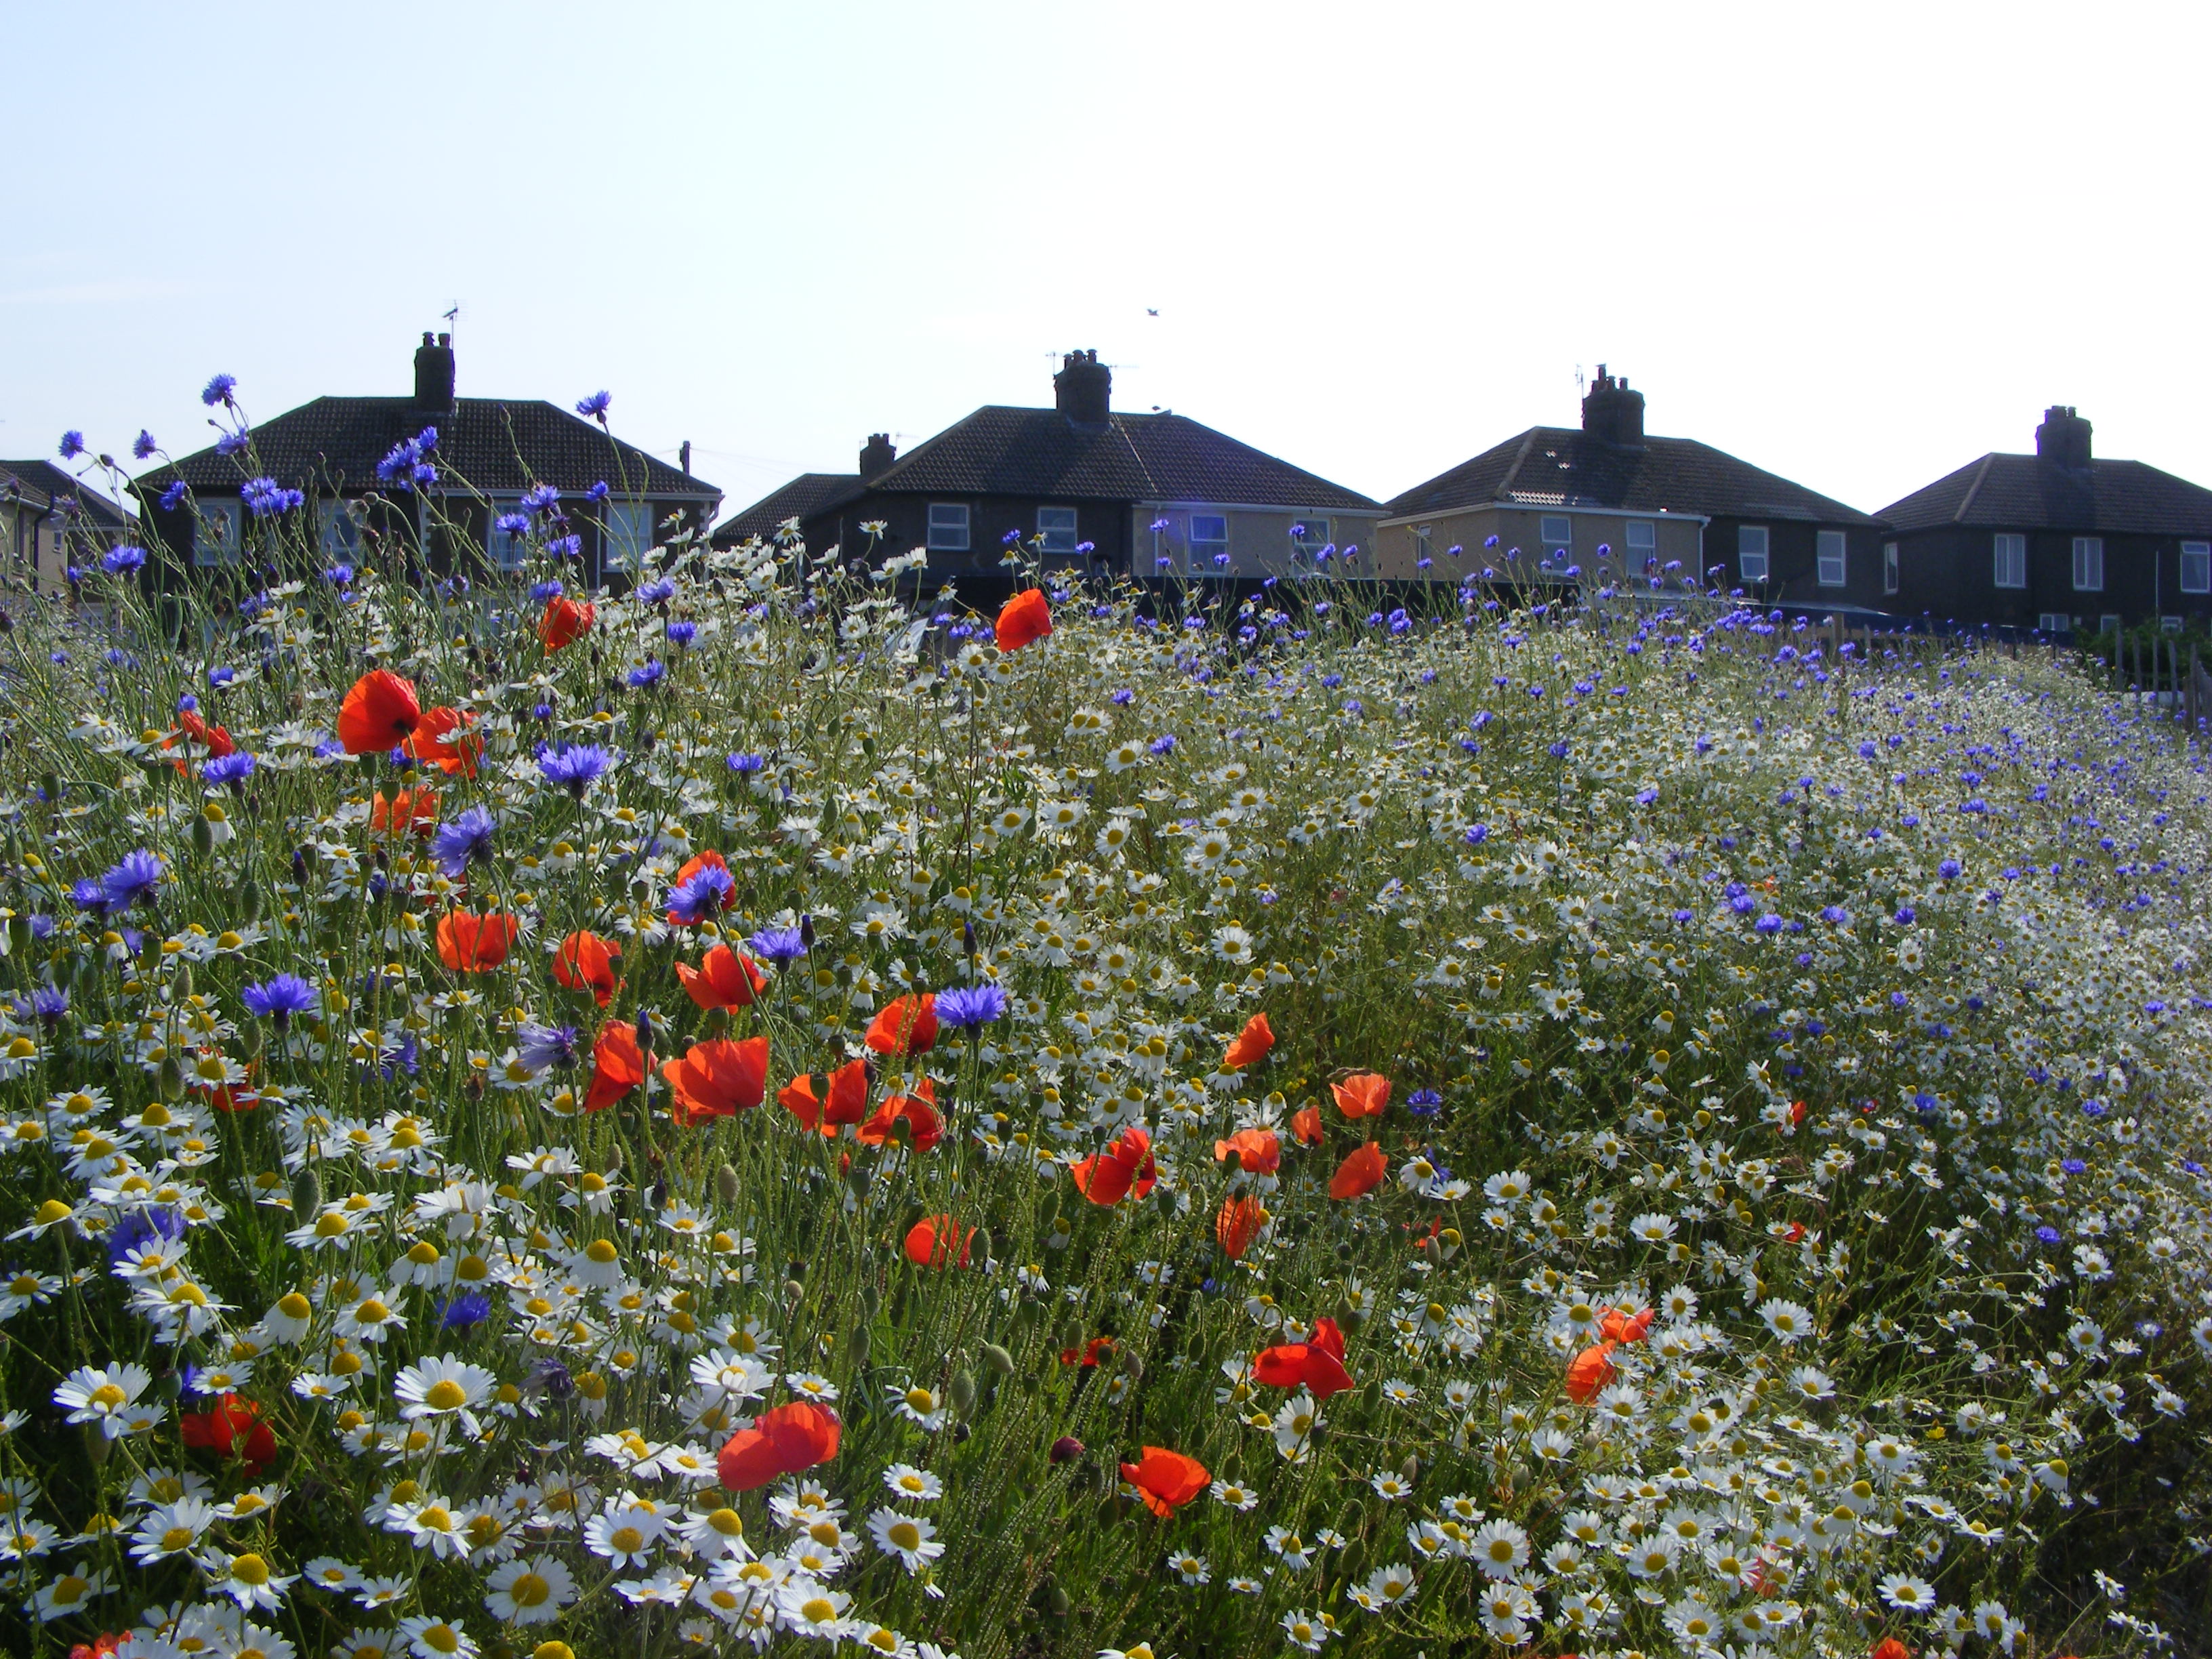 Corn chamomile, corn flowers and field poppies at Haig. Copyright Chris Gomersall.